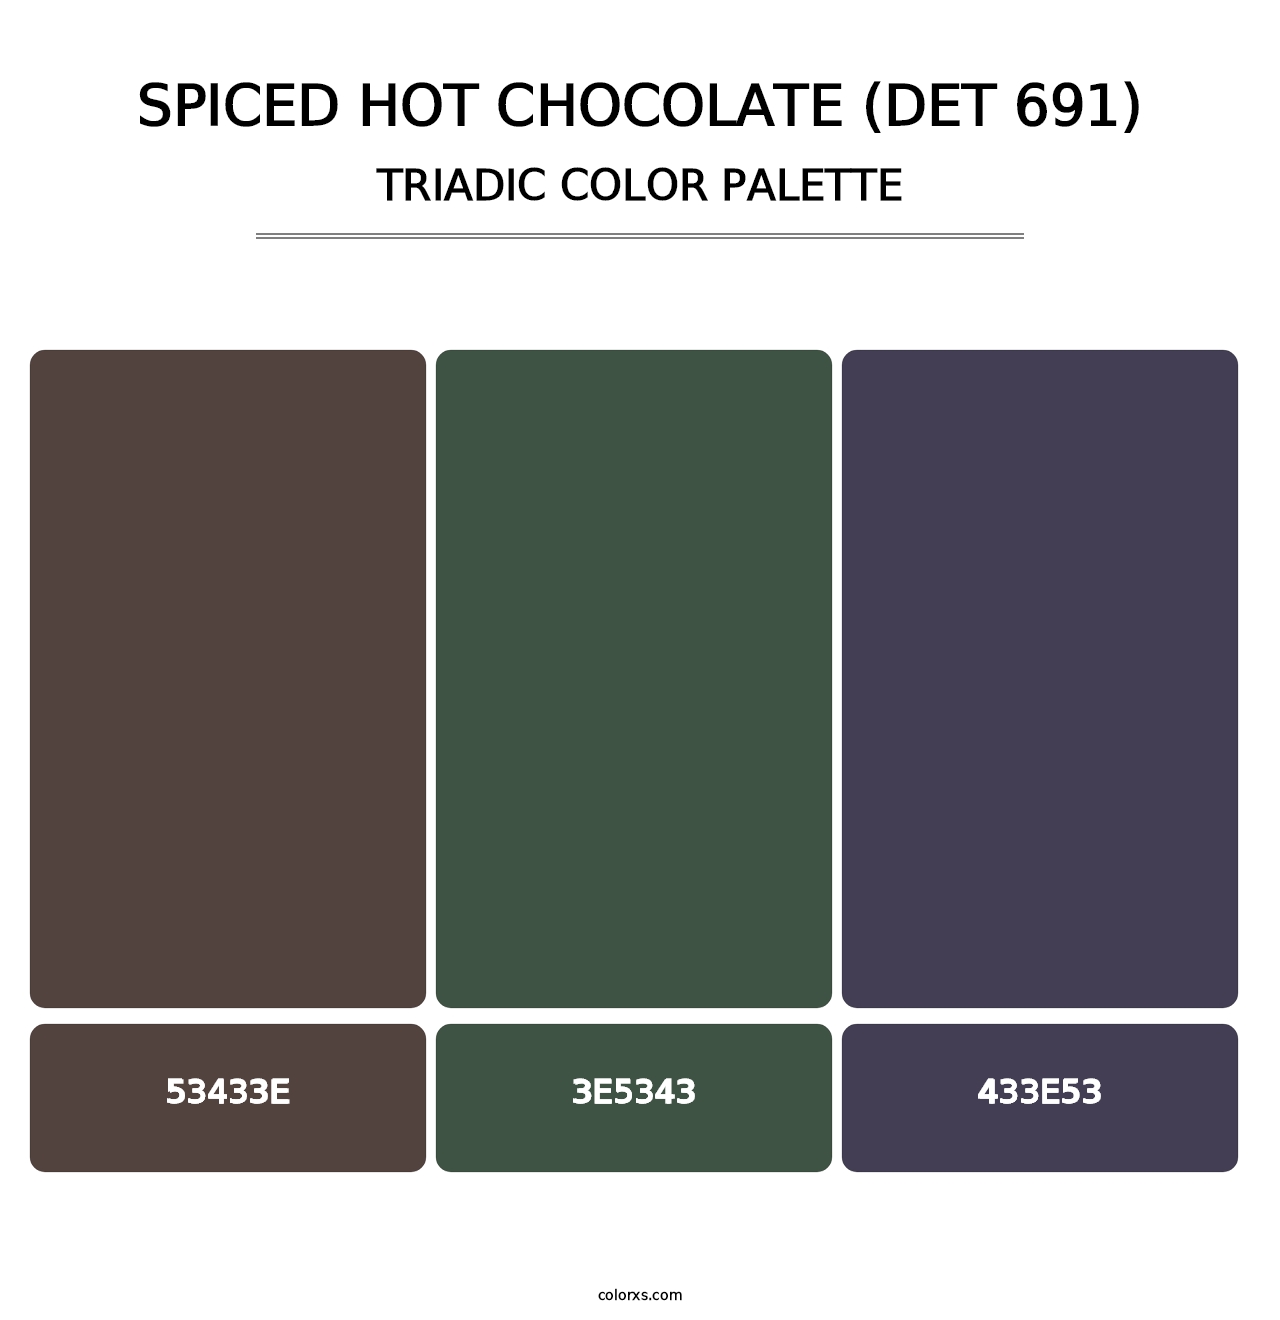 Spiced Hot Chocolate (DET 691) - Triadic Color Palette